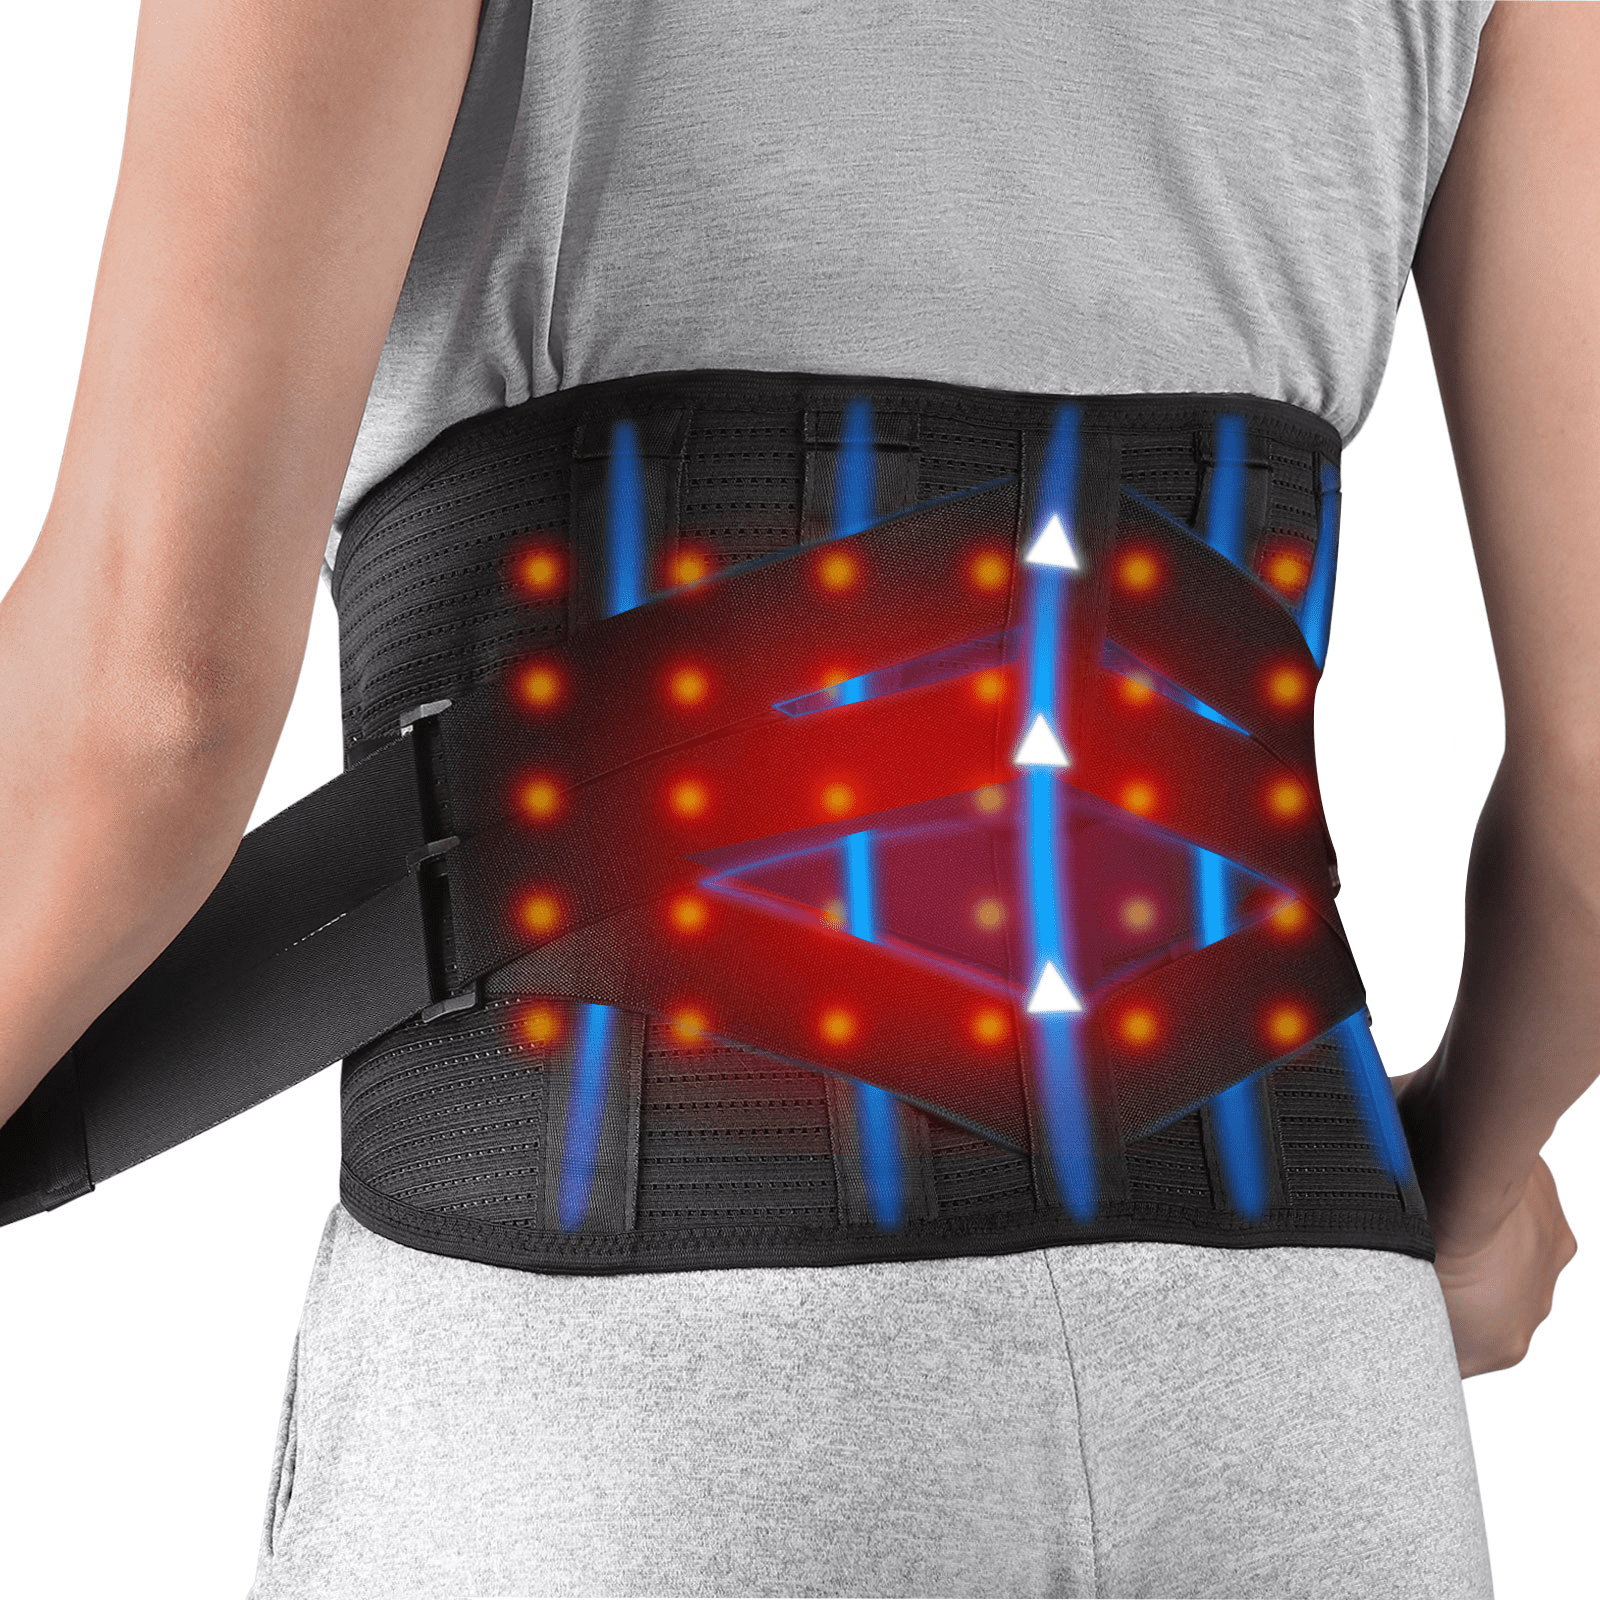 Backsmith Inflating Back Belt Review - Relieve Back Pain Fast